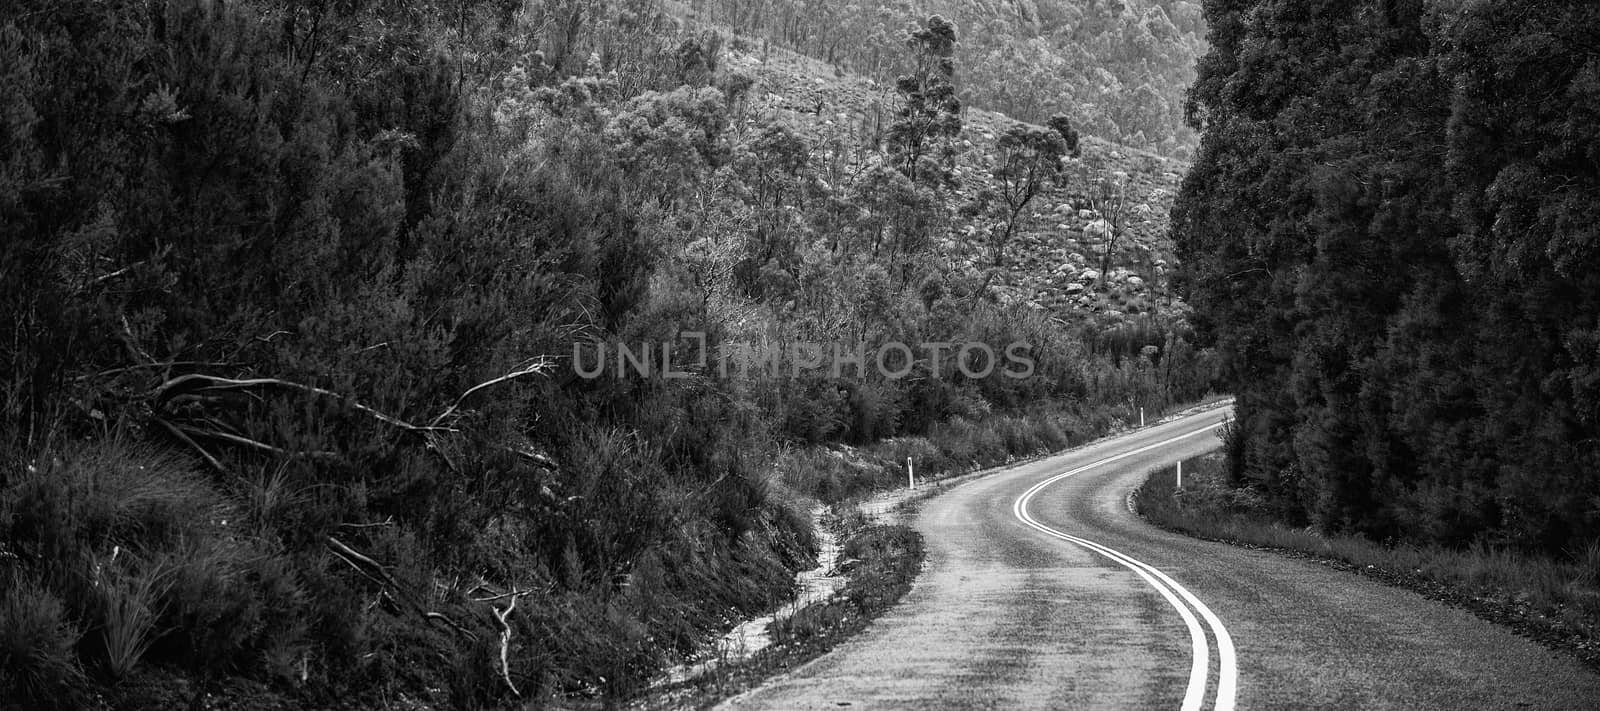 Road and mountains in the Tasmanian countryside. Black and white by artistrobd